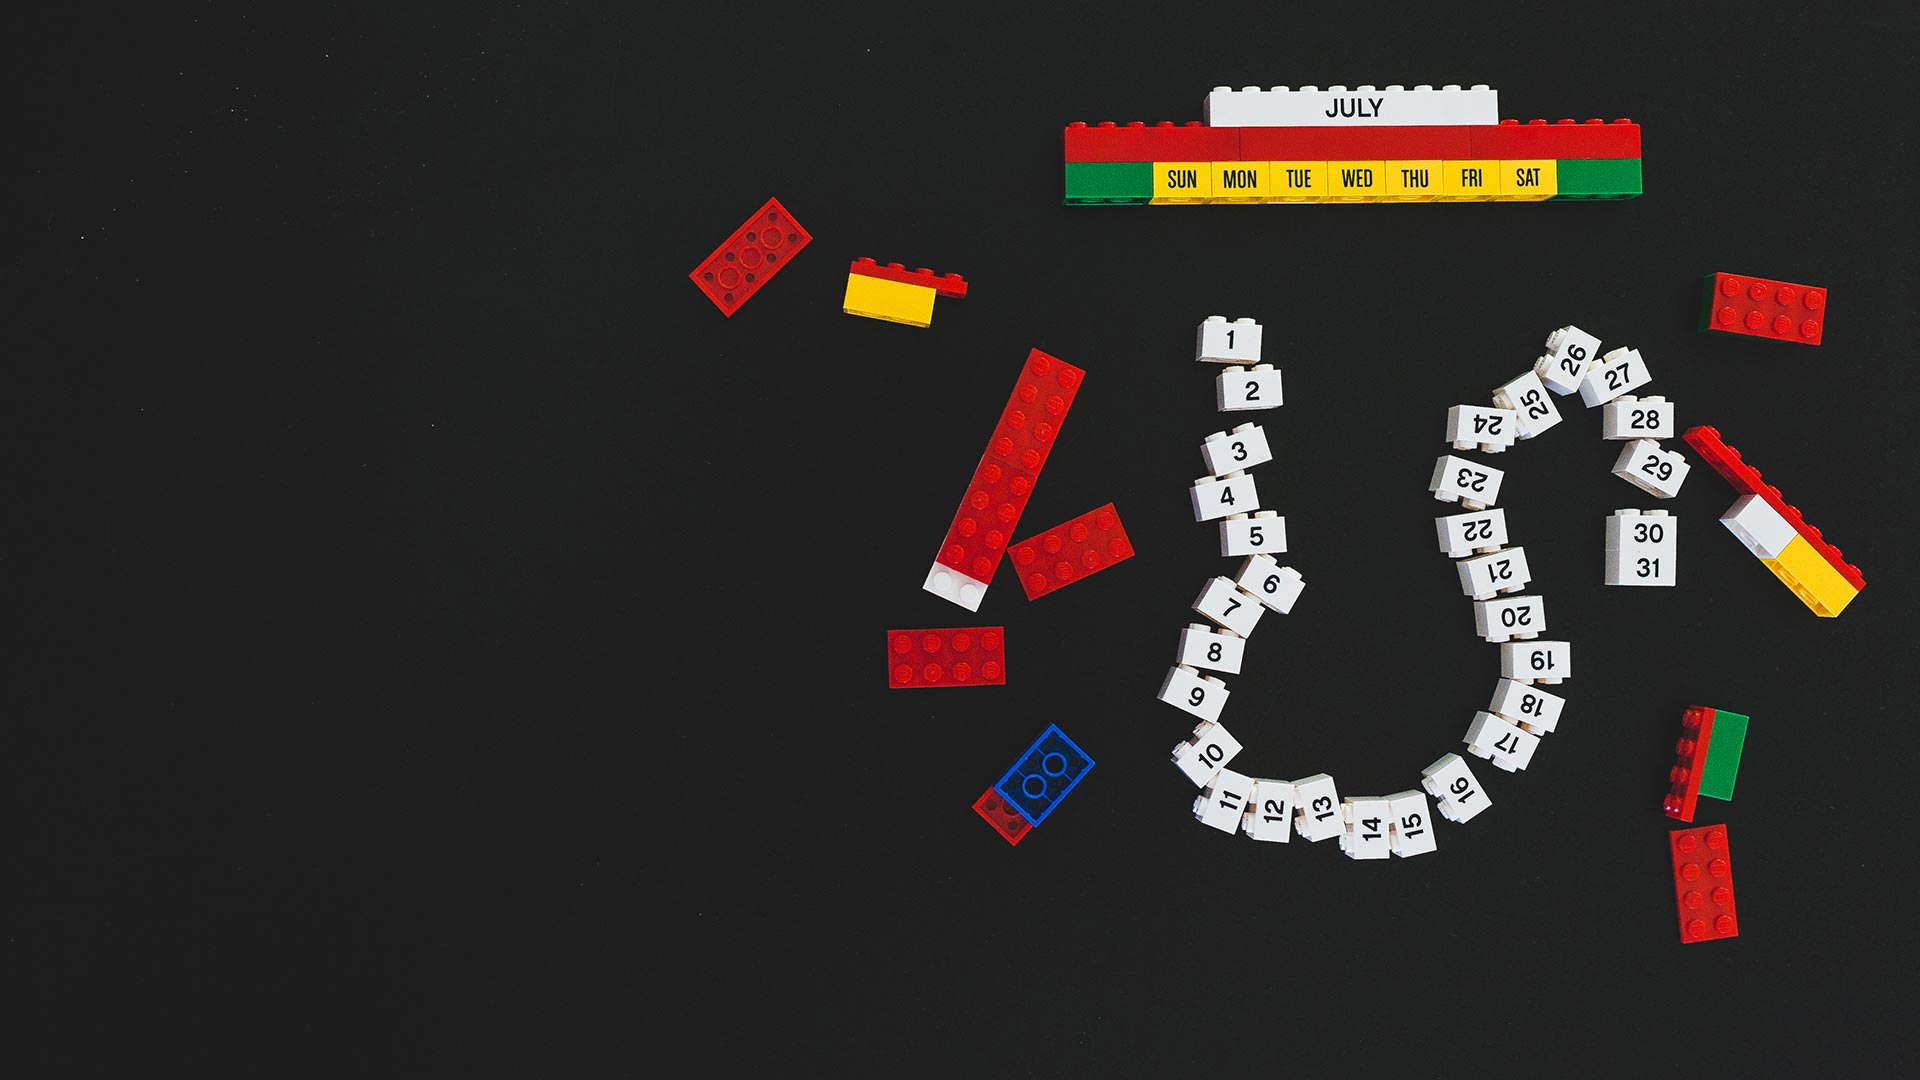 Lego calendar with the numbers 1 through 31